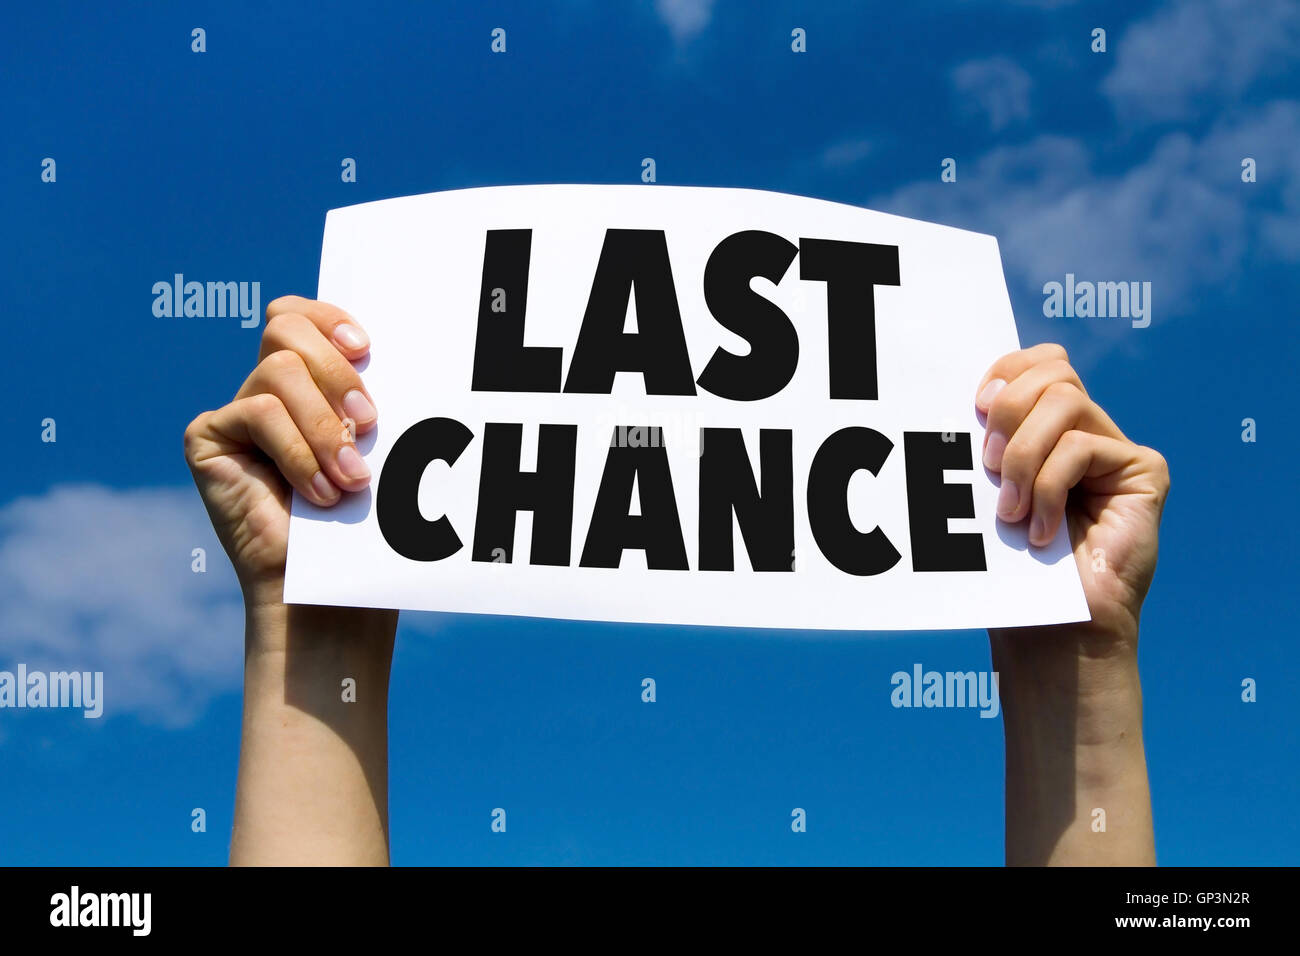 last chance, concept, hands holding paper sign Stock Photo